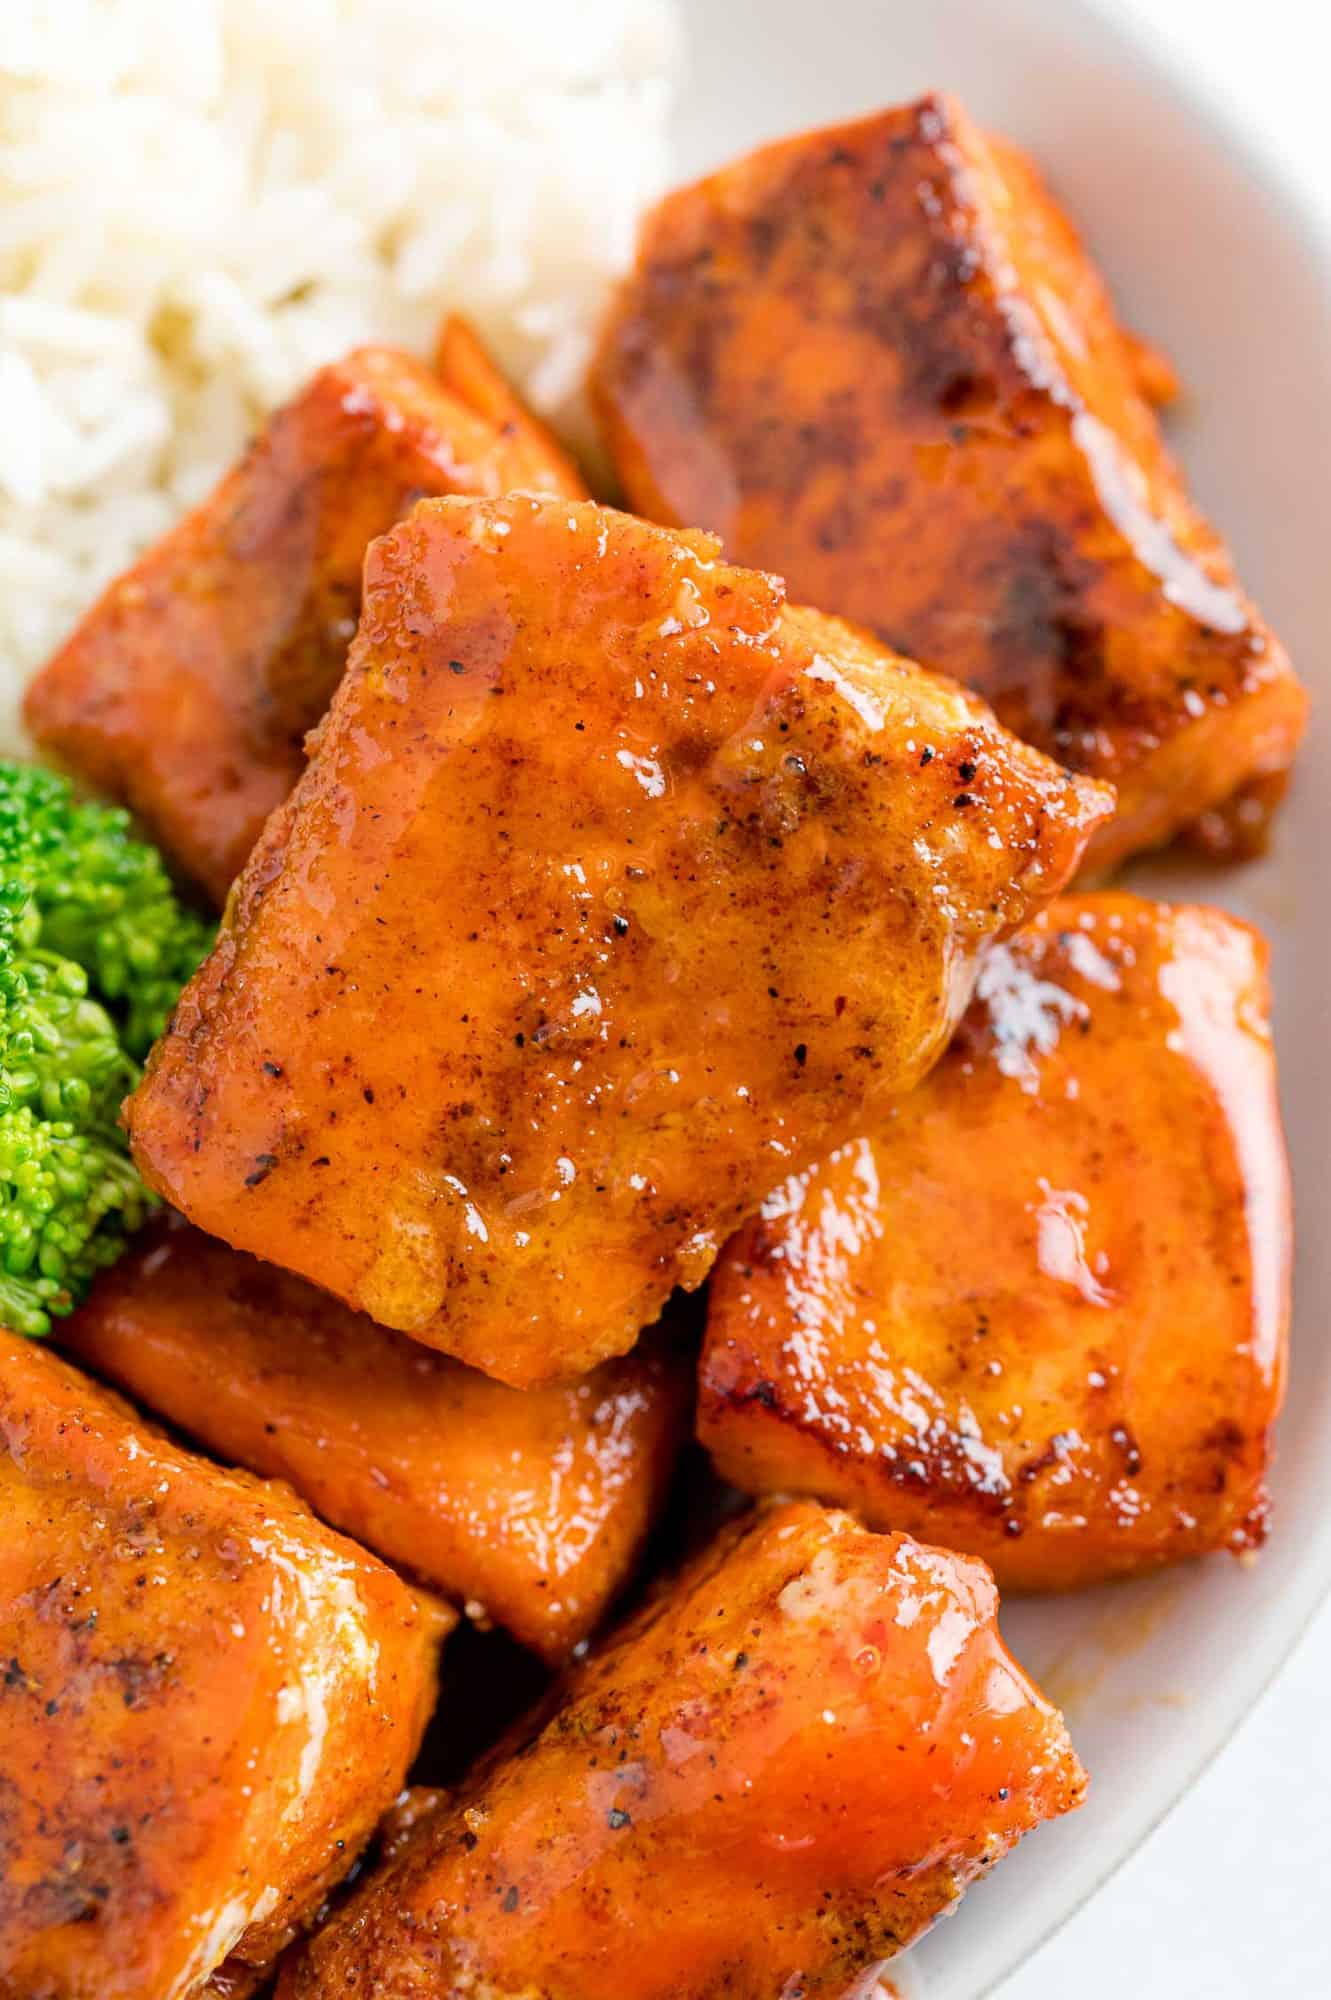 Salmon bites on a plate with broccoli and rice.